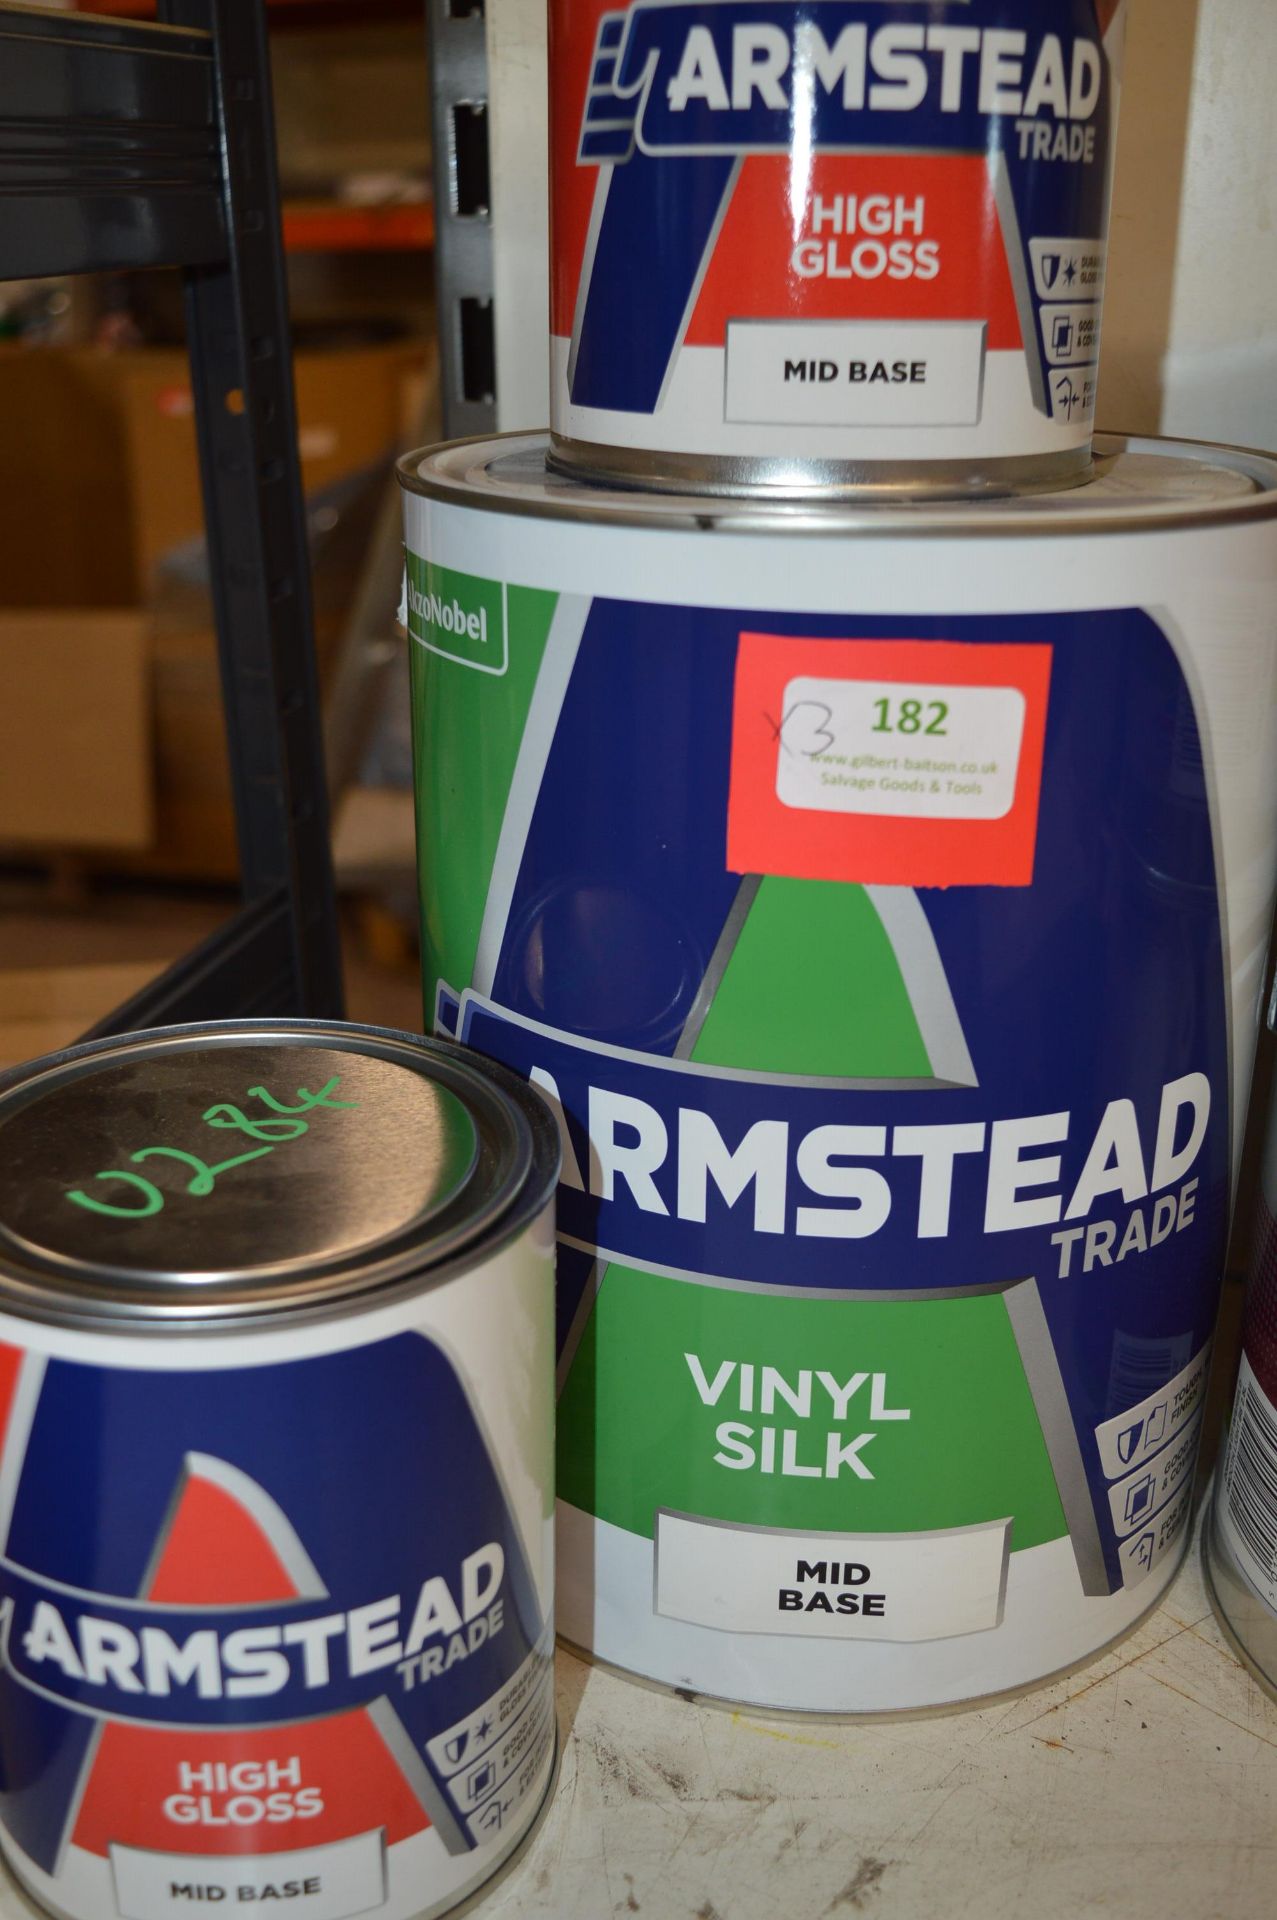 *5L of Armstead Vinyl Silk Mid Base, and 2x 1L of